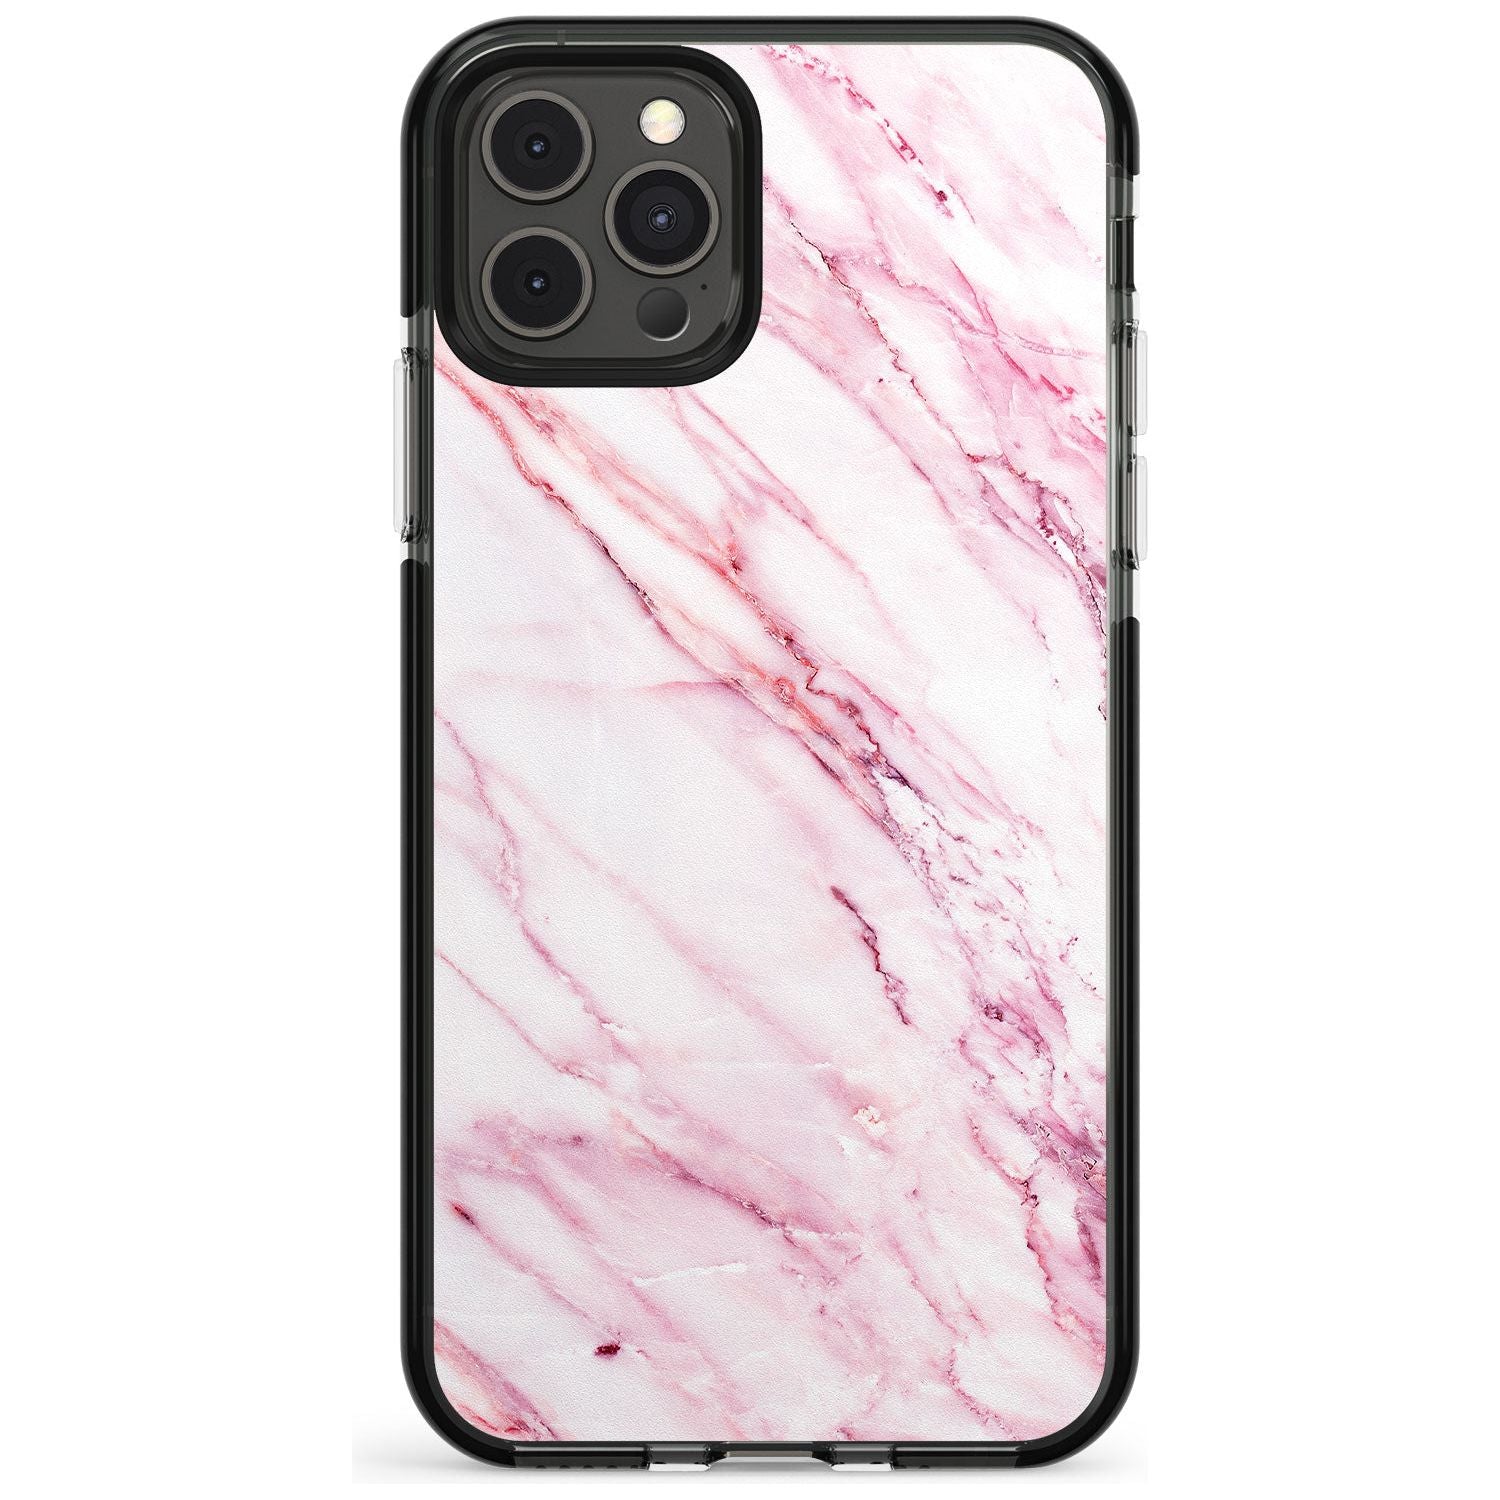 White & Pink Onyx Marble Texture Pink Fade Impact Phone Case for iPhone 11